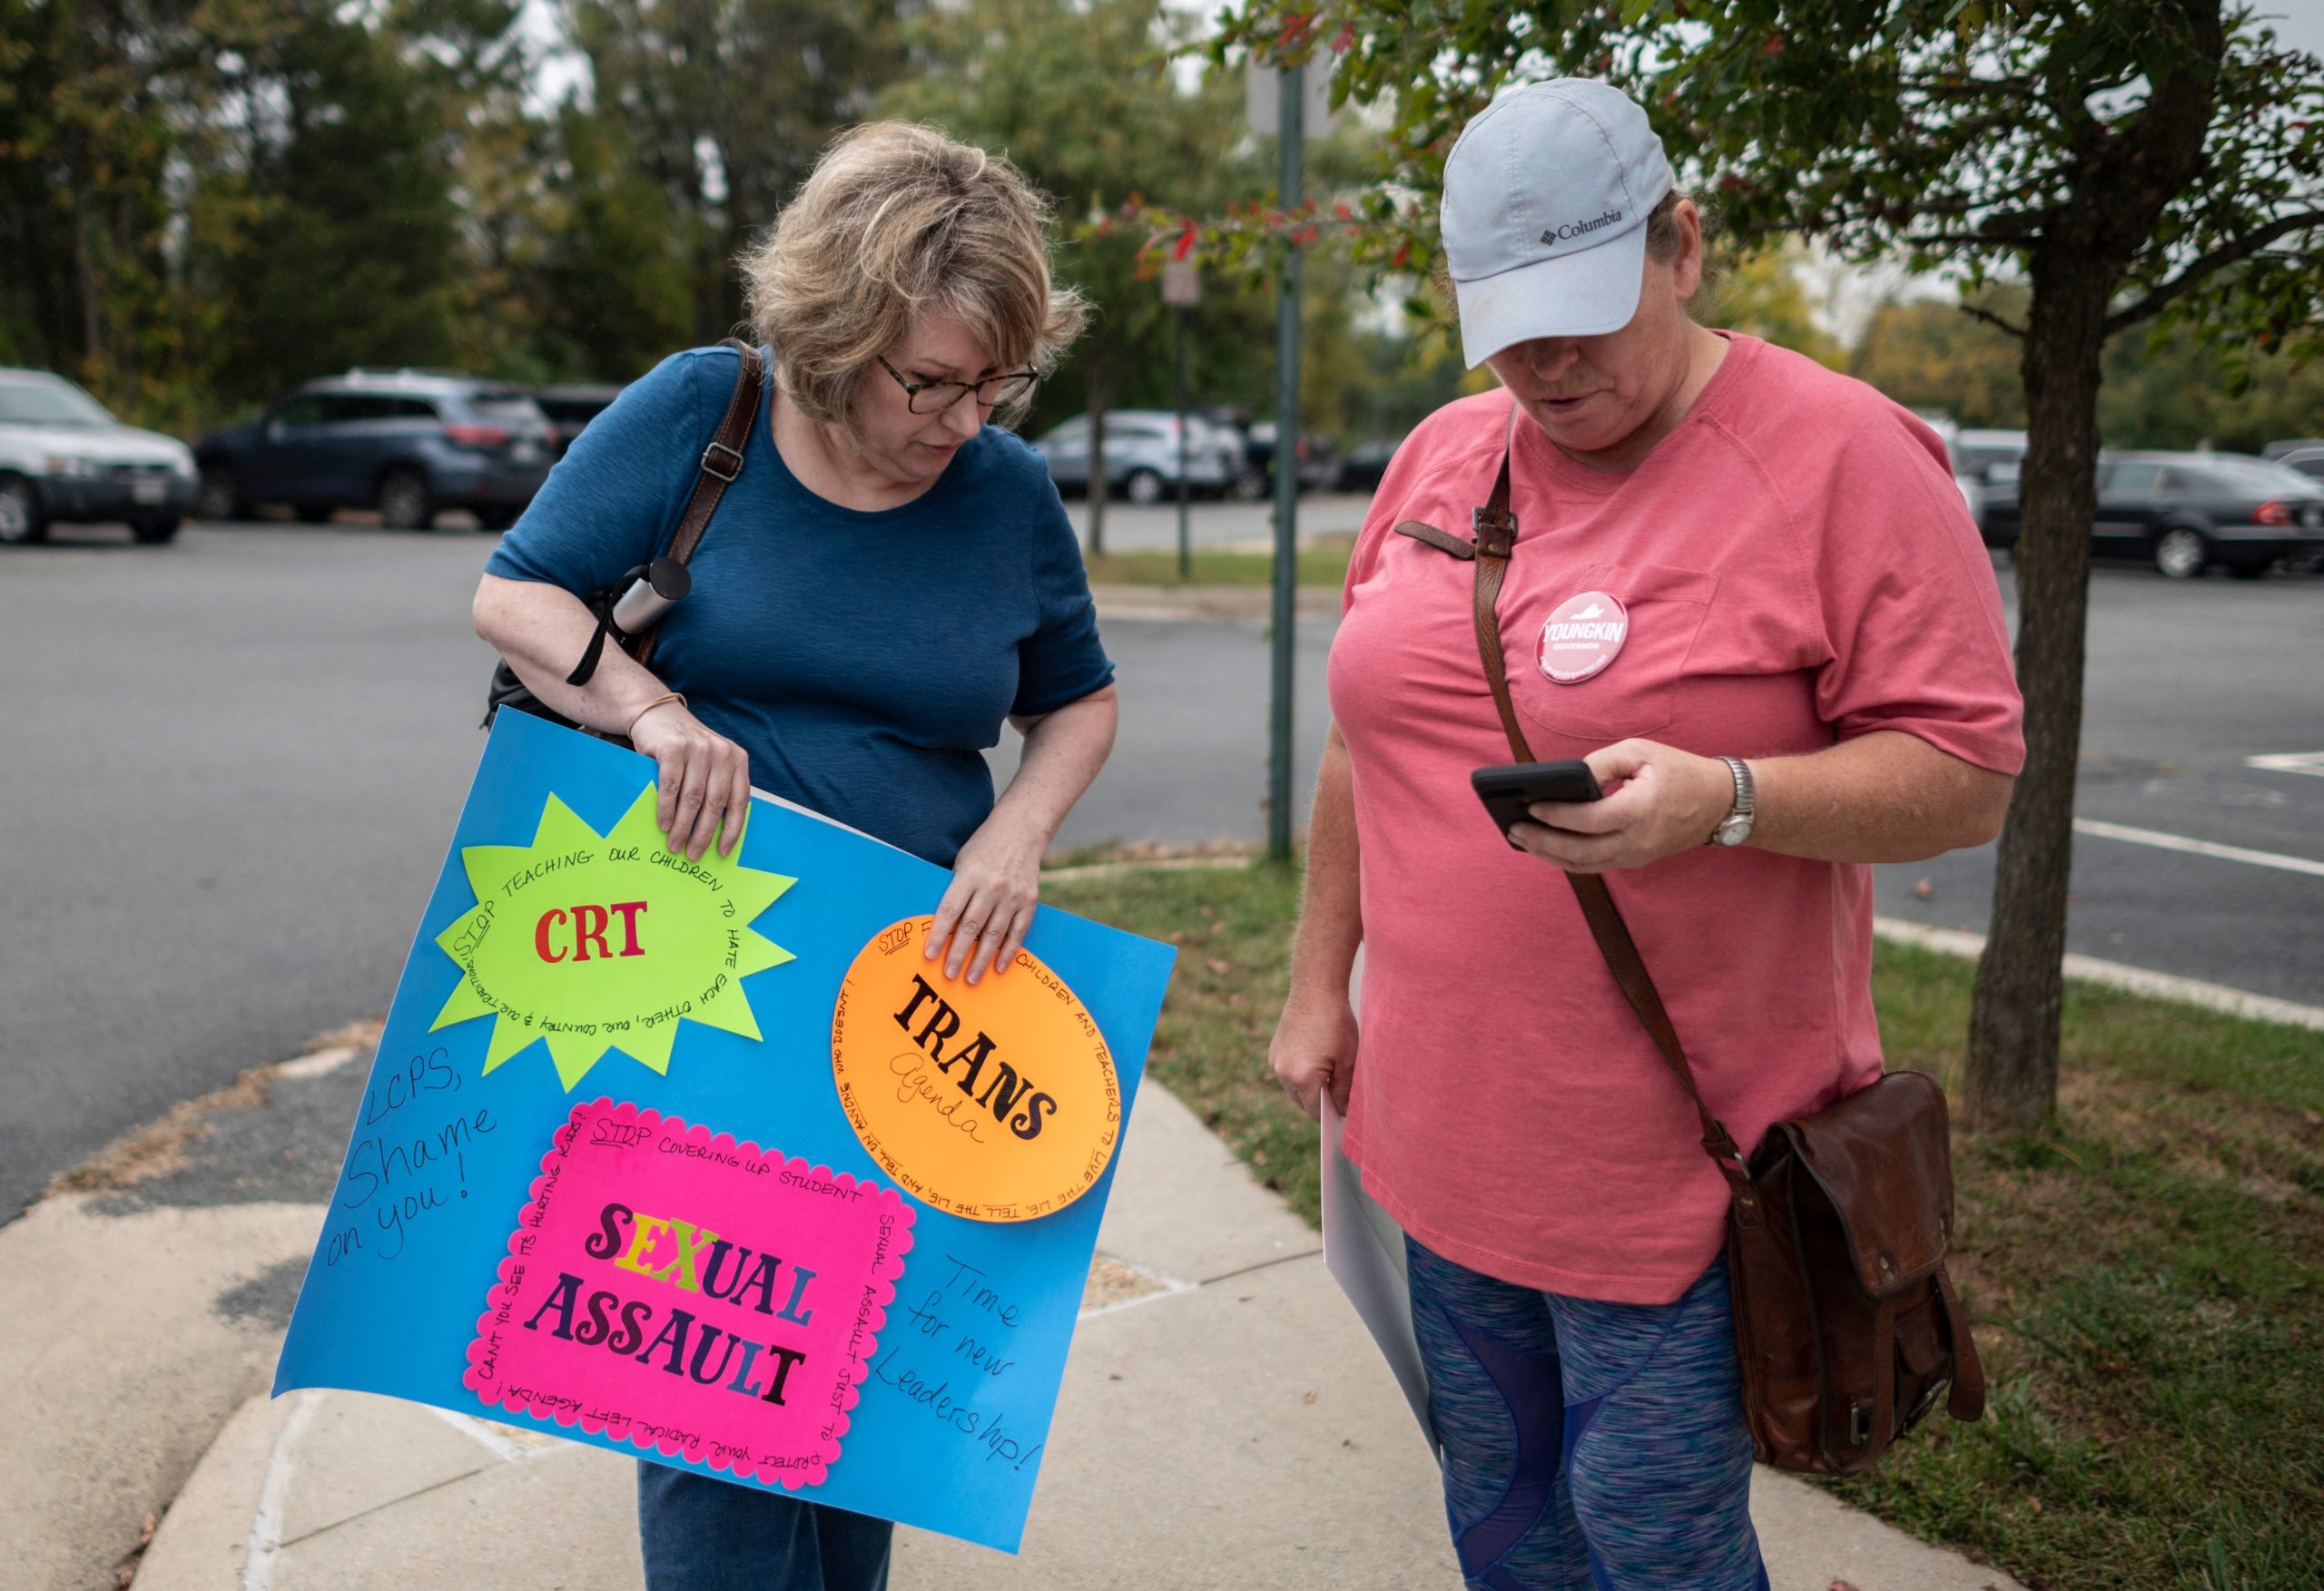 Protesters and activists stand outside a Loudoun County Public Schools (LCPS) board meeting in Ashburn, Virginia on October 12, 2021. - Loudoun county school board meetings have become tense recently with parents clashing with board members over transgender issues, the teaching of Critical Race Theory (CRT) and Covid-19 mandates. Recently tensions between groups of parents and the school board increased after parents say an allegedly transgender individual assaulted a girl at one of the schools. Earlier this month US Attorney General Merrick Garland directed federal authorities to hold strategy sessions in the next month with law enforcement to address the increasing threats targeting school board members, teachers and other employees in the nation's public schools. This in response to a request from the National School Boards Association asking US President Joe Biden for federal assistance to investigate and stop threats made over policies including mask mandates, likening the vitriol to a form of domestic terrorism. (Photo by Andrew CABALLERO-REYNOLDS / AFP) (Photo by ANDREW CABALLERO-REYNOLDS/AFP via Getty Images)